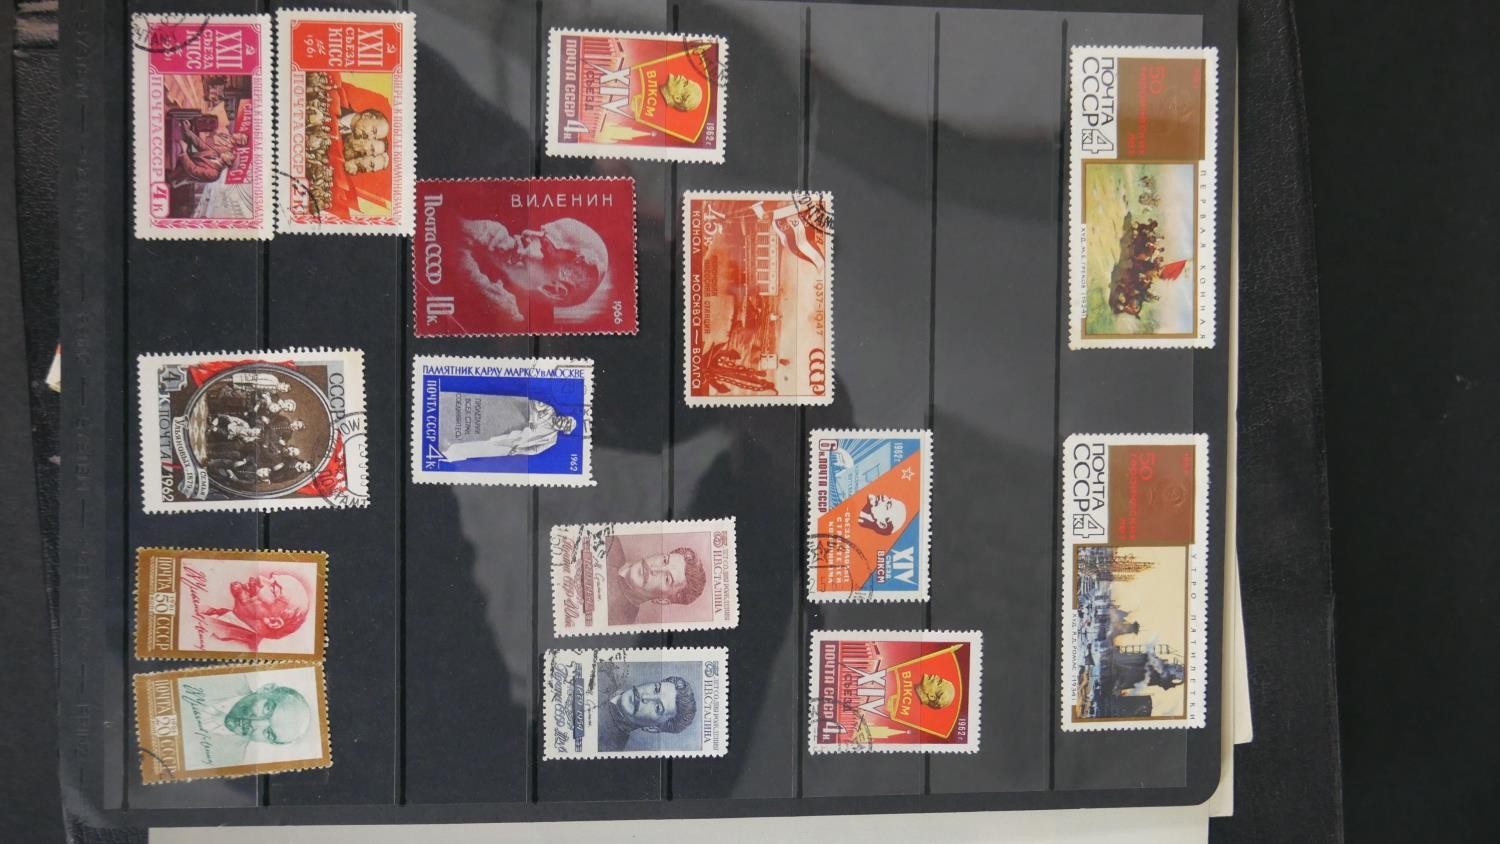 An album of world stamps along with a British Collecta coin album filled with various British coins. - Image 7 of 15